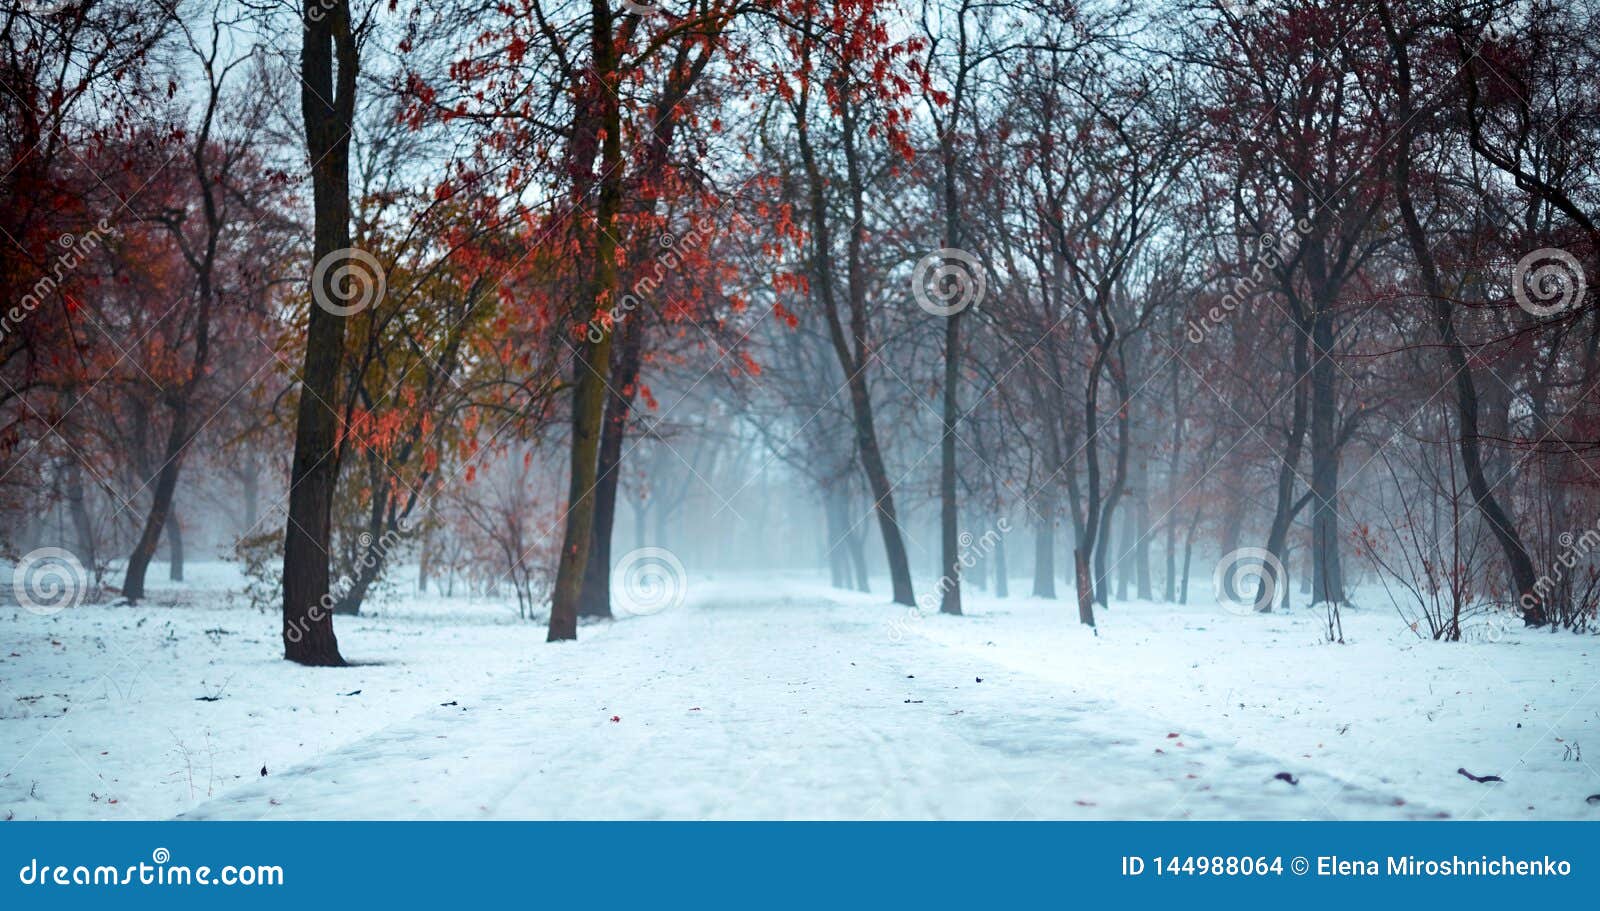 Creepy And Foggy Winter Landscape In Snowy Park With